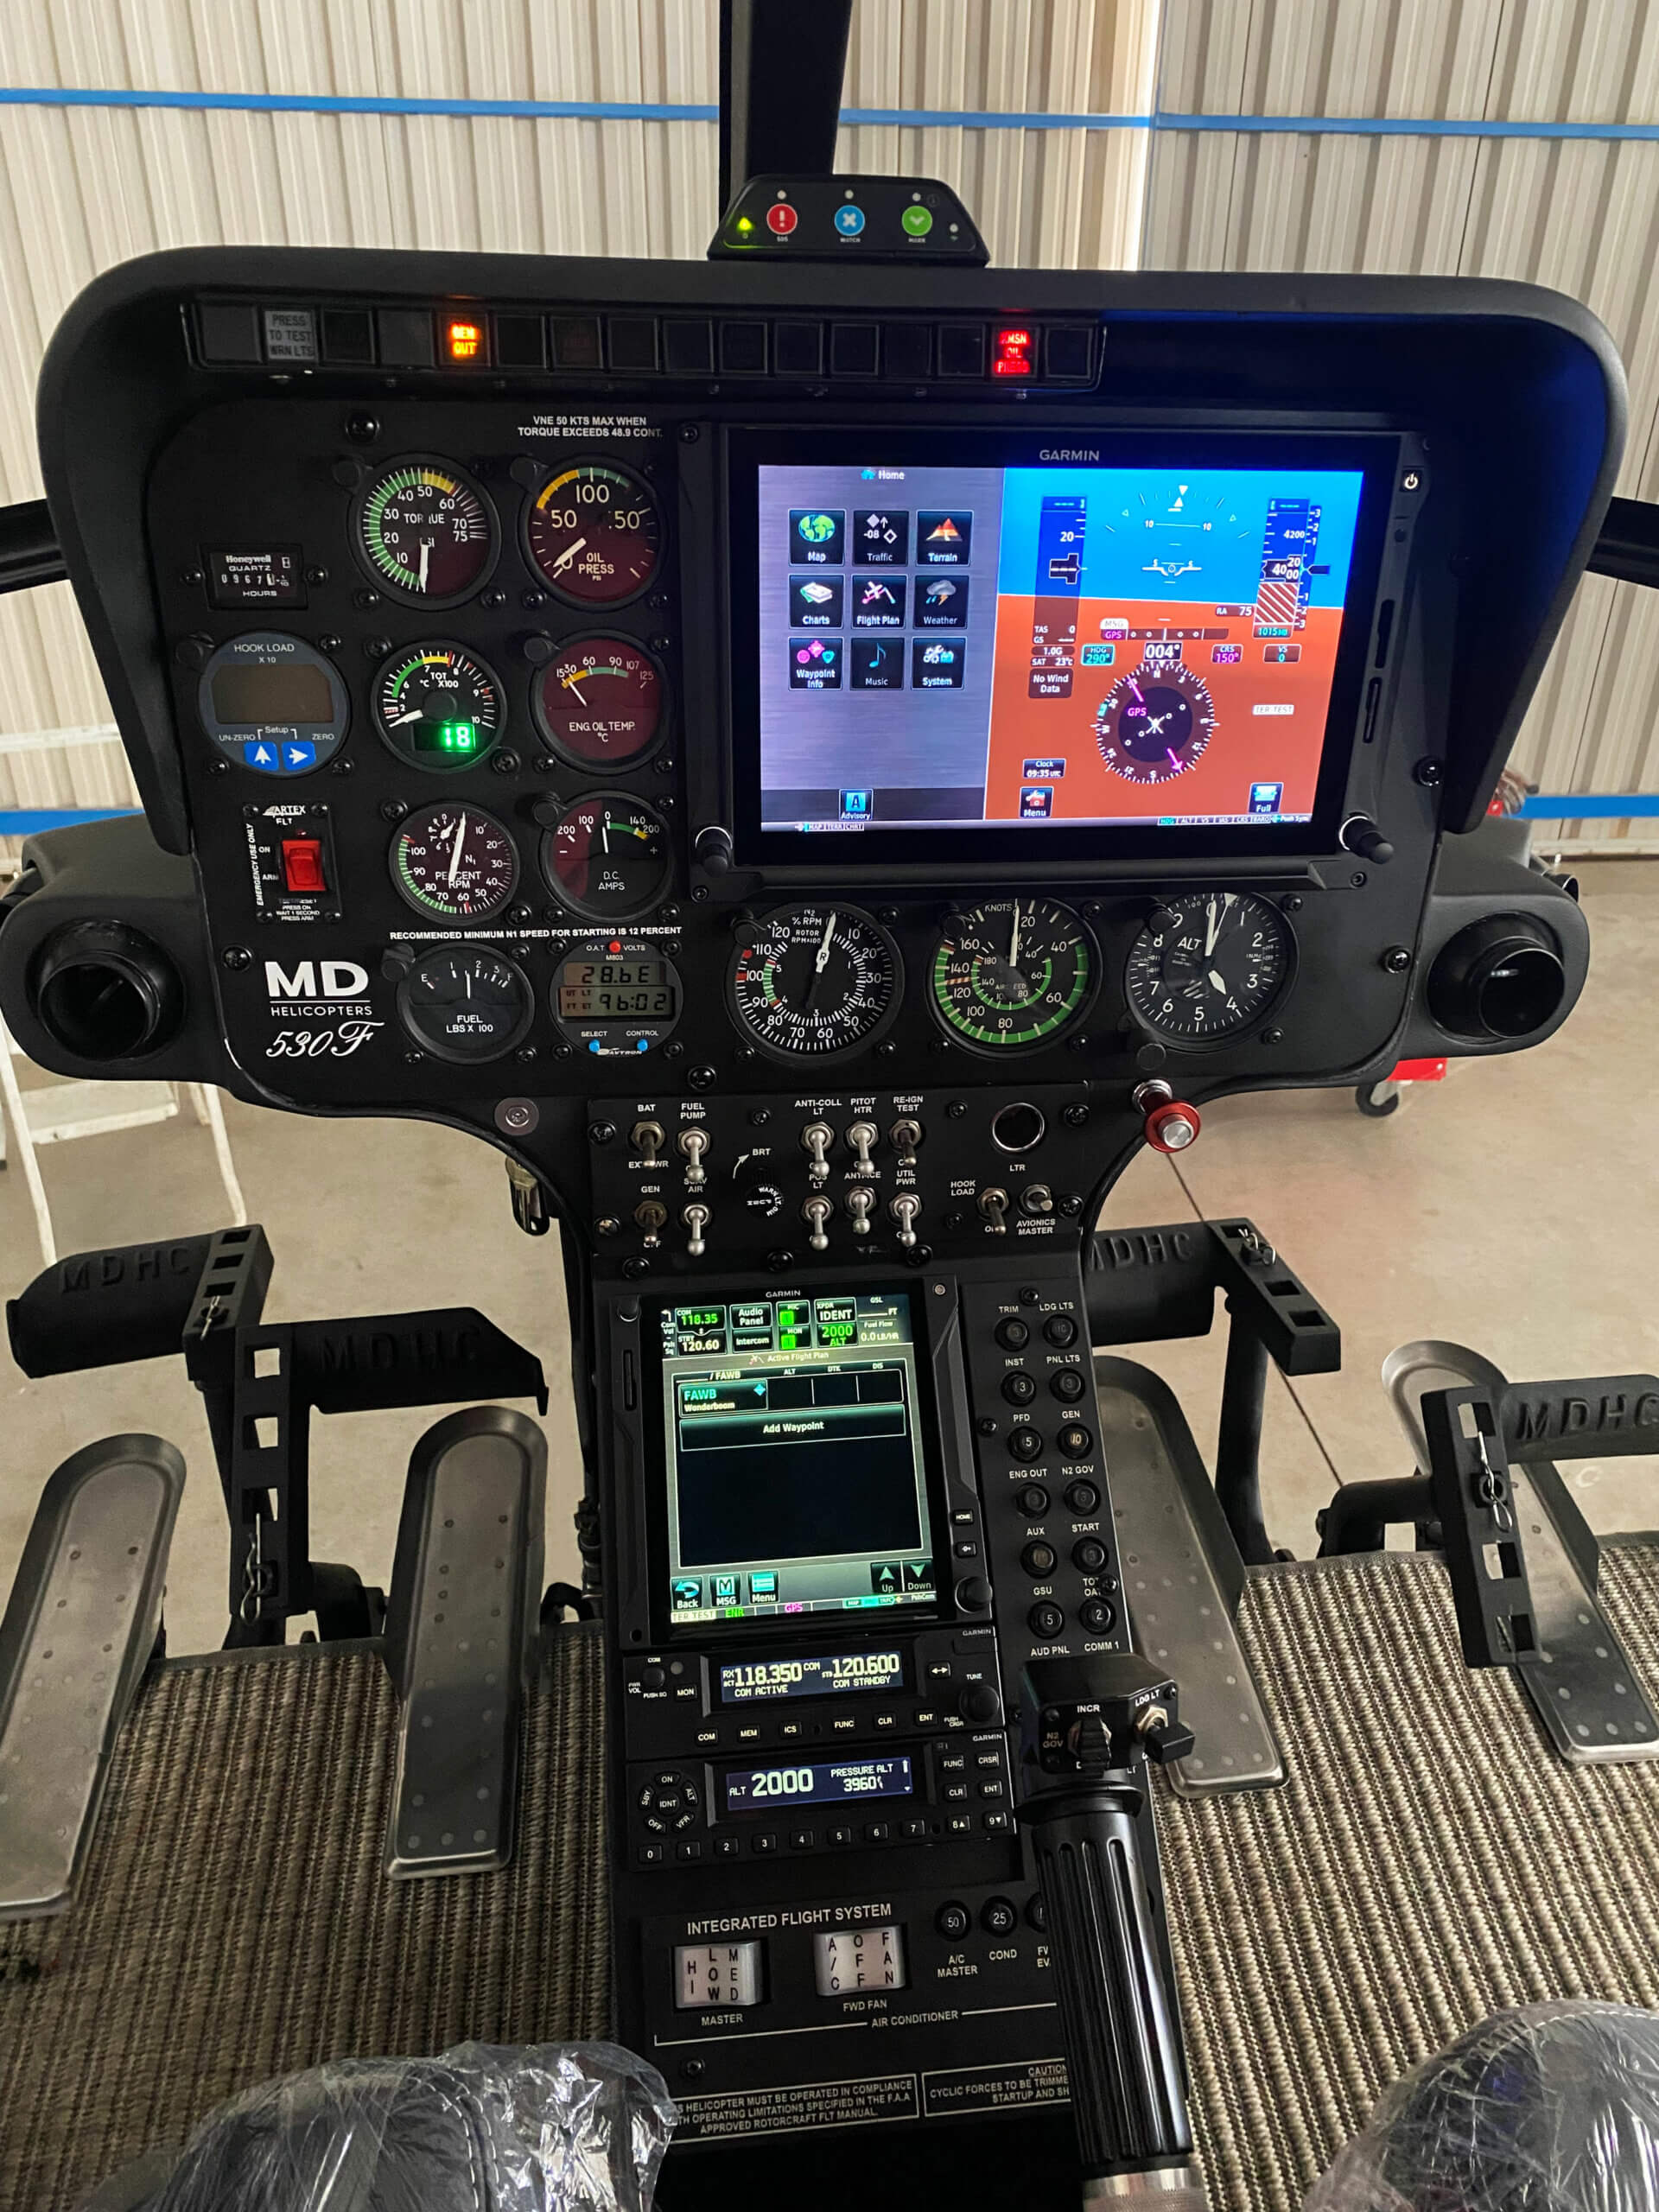 Installed a Garmin G500HTXi Flight display, GTN 750Xi, GTR 225 Comm radio and GTX 345 ADS-B in/out Transponder to a MD530F Helicopter.